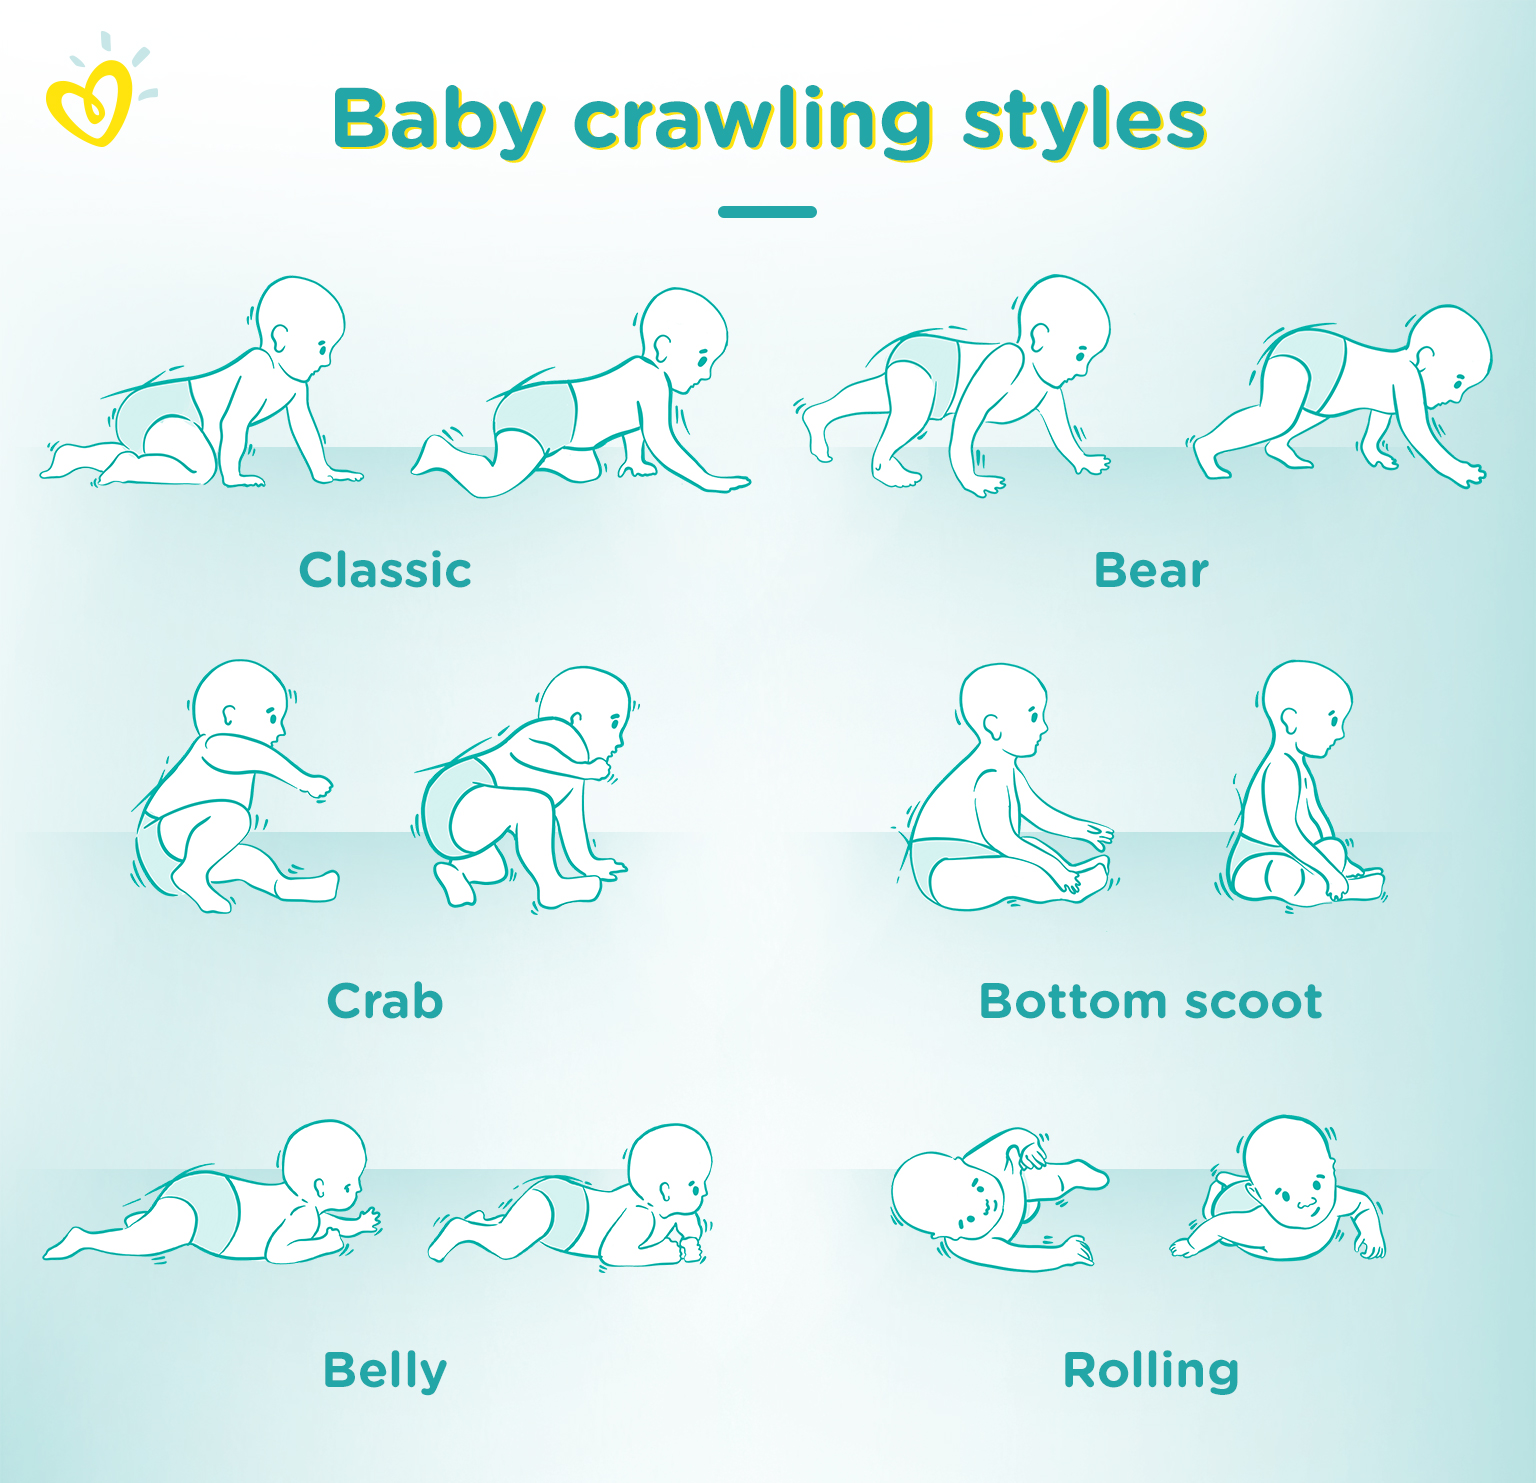 What is the earliest age a baby can crawl?